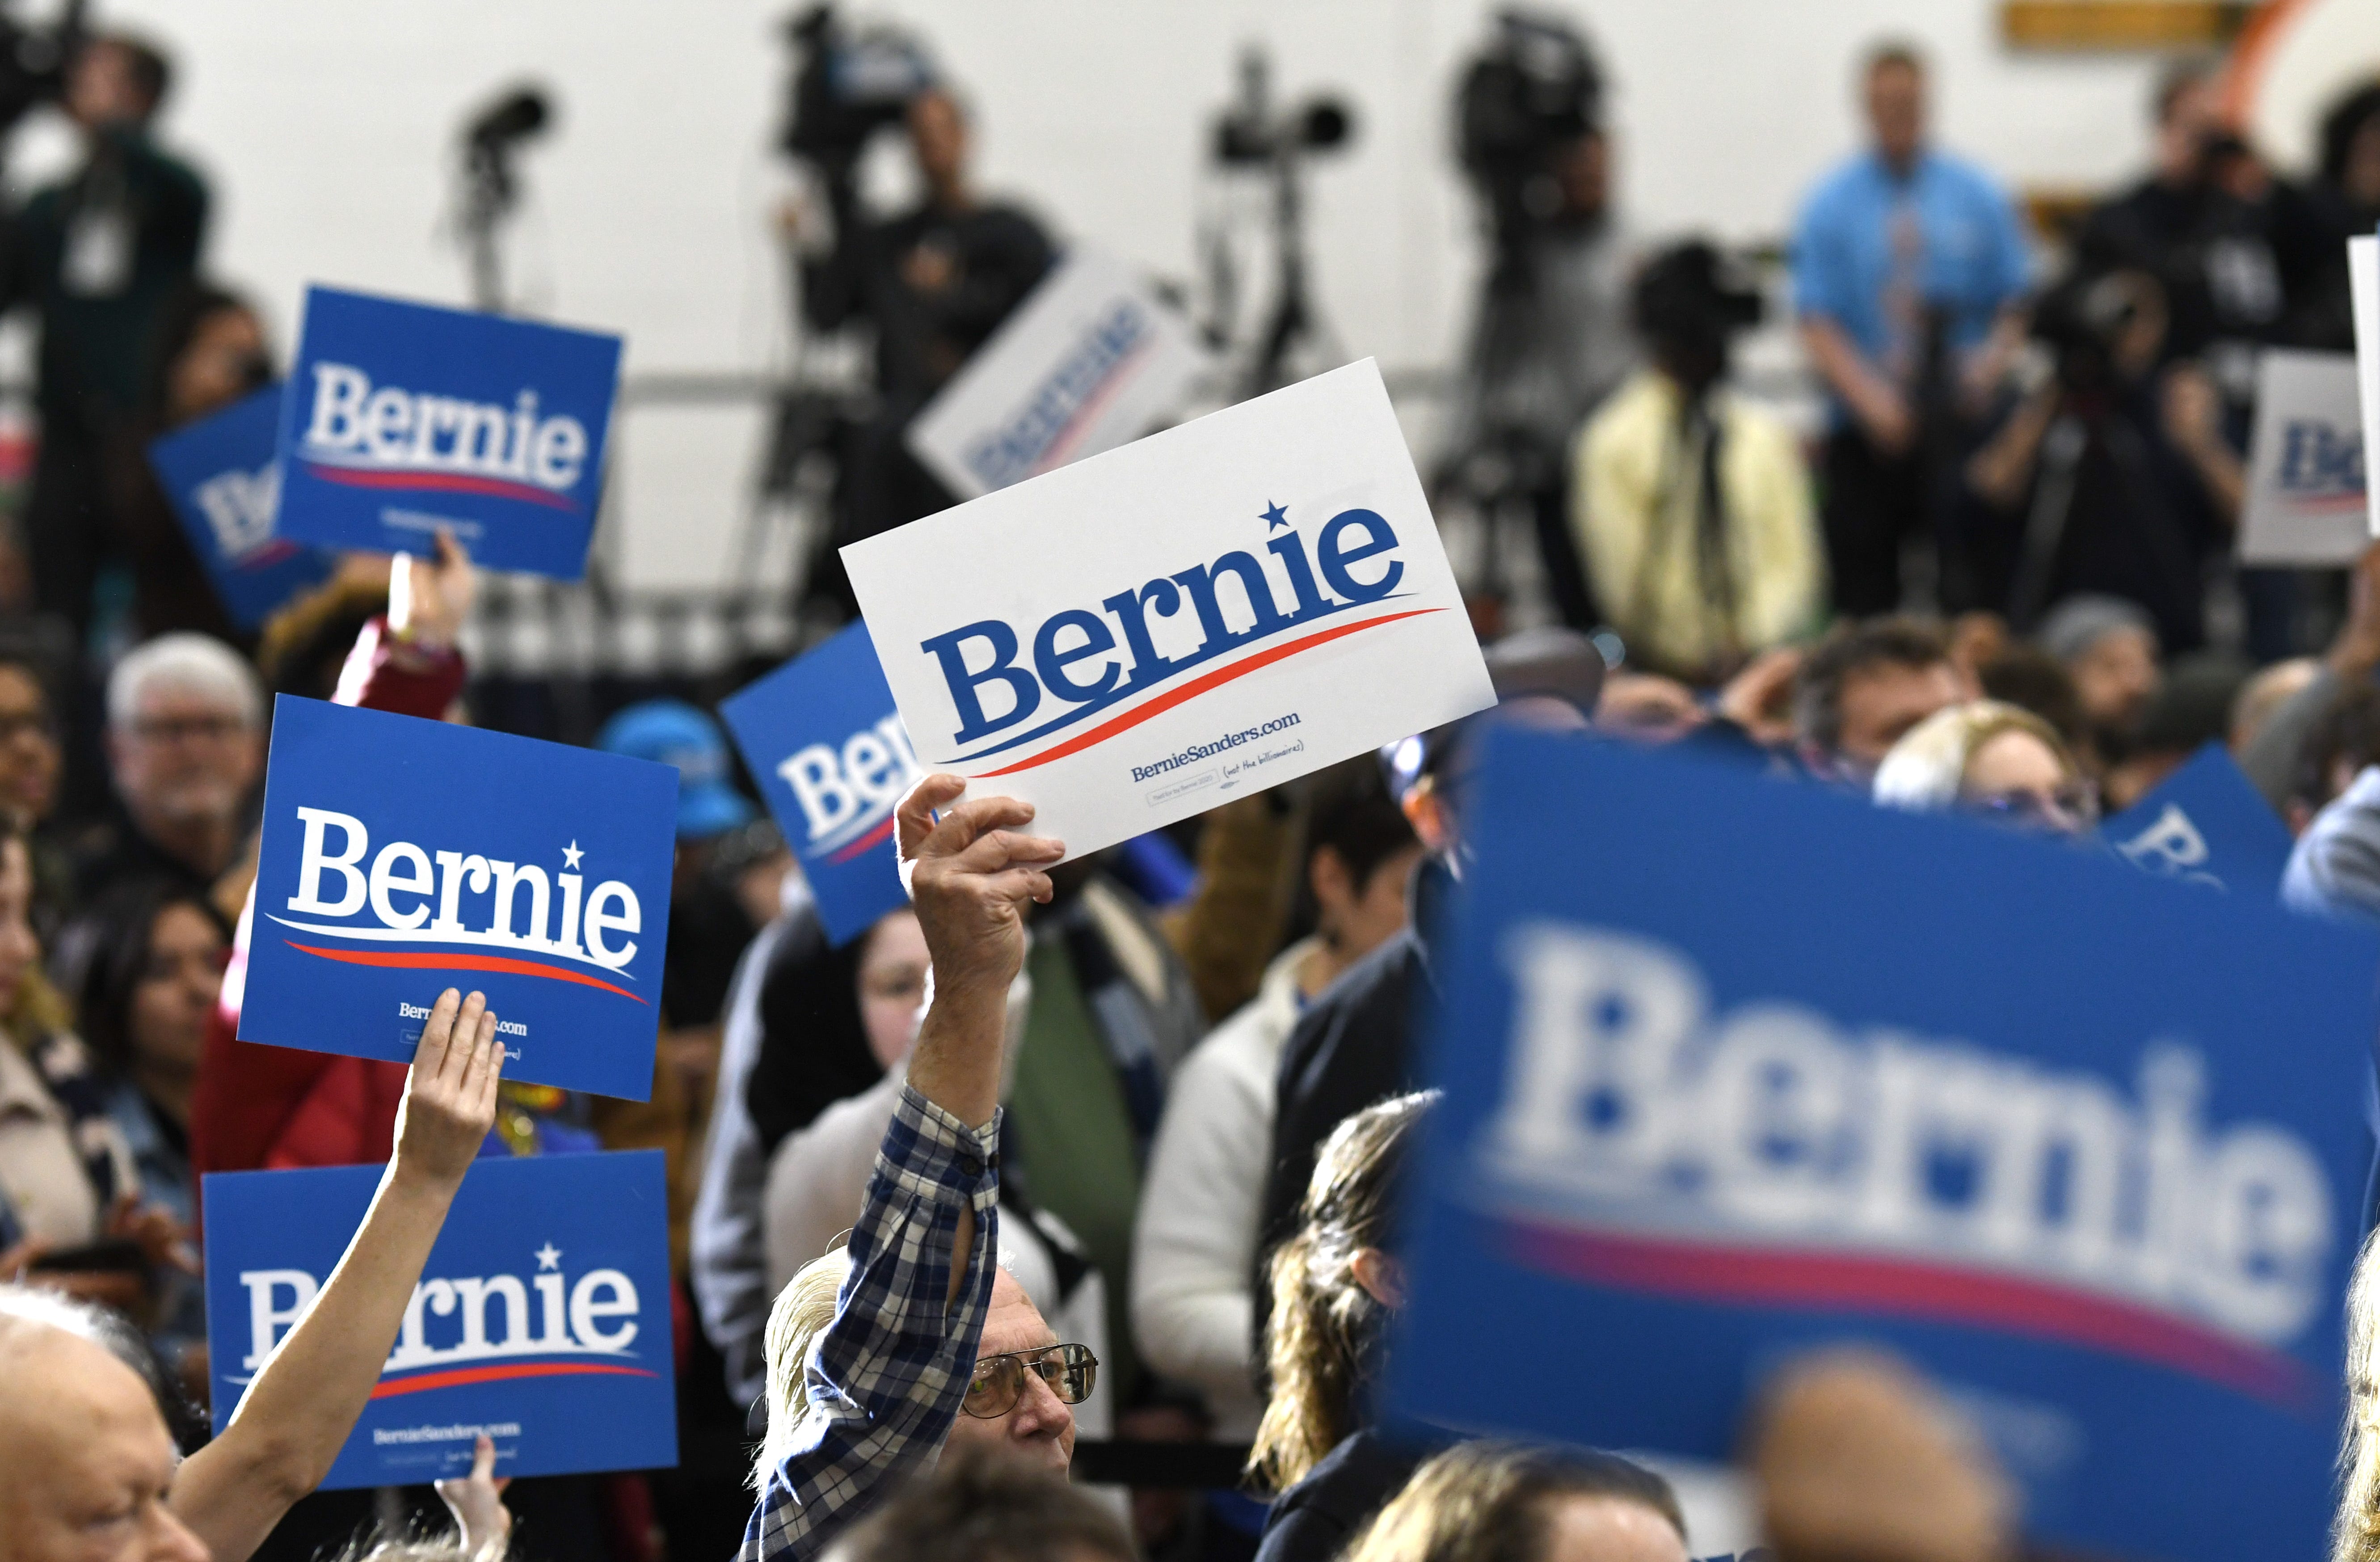 Supporters of Bernie Sanders hold signs during a campaign stop in Dearborn.